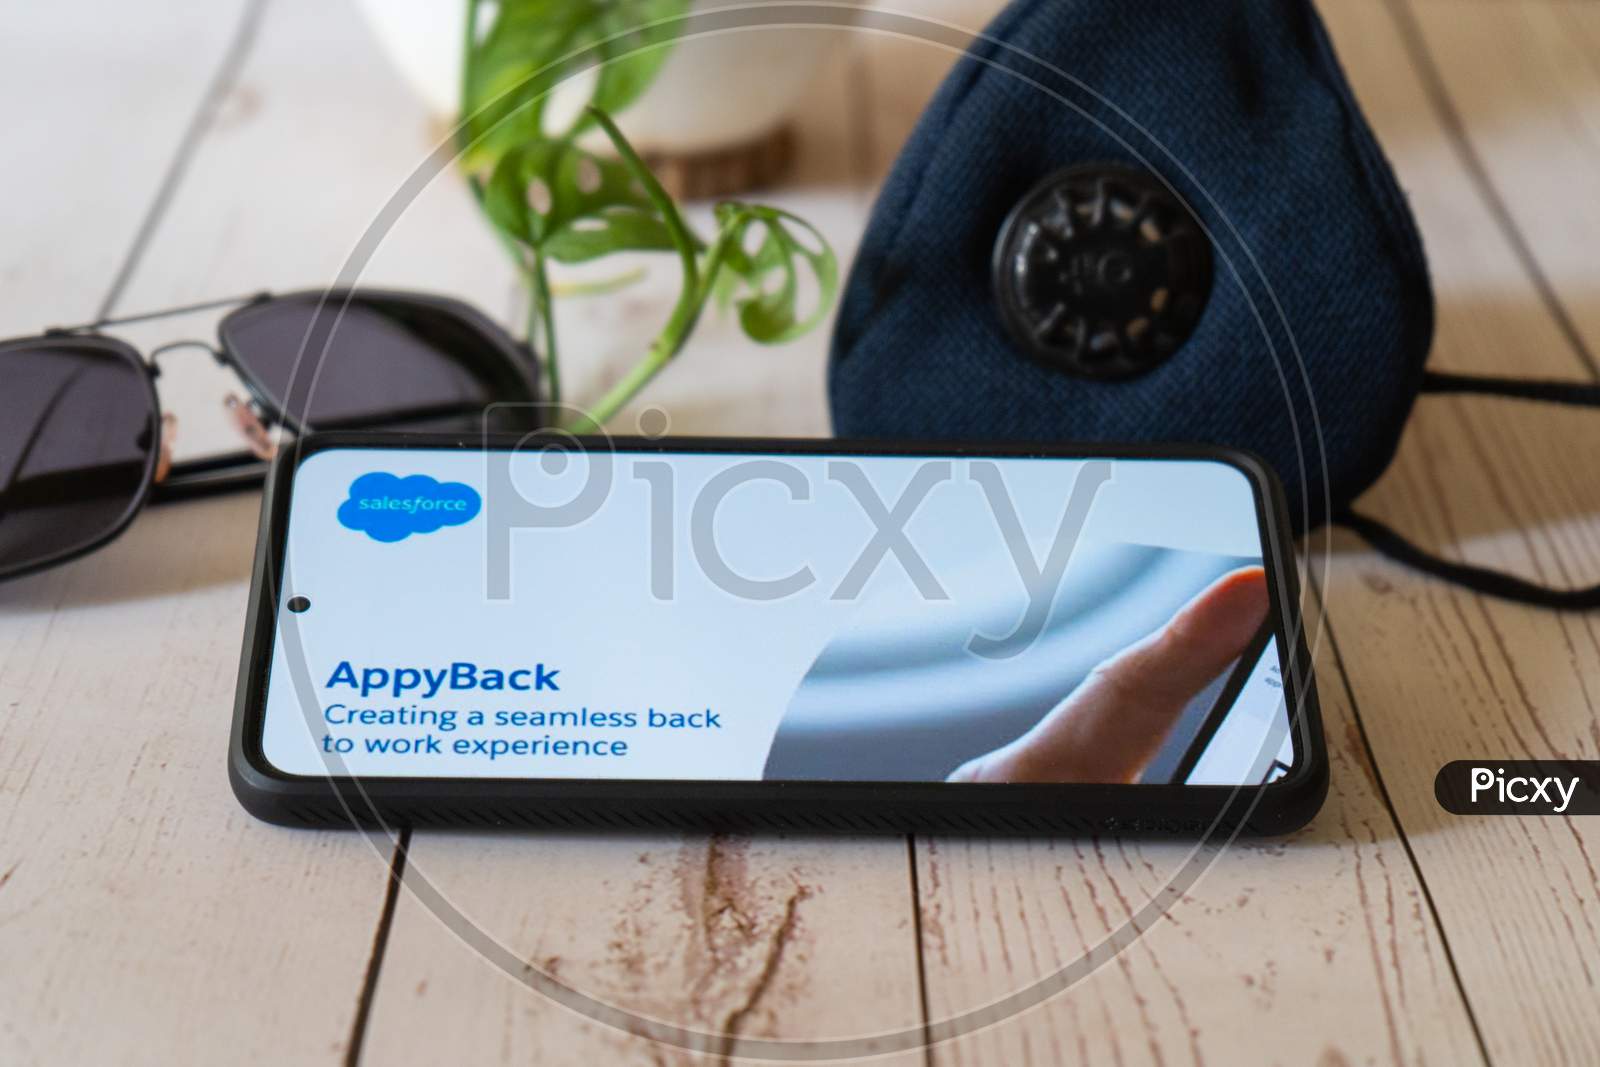 Salesforce Led Appyback App One Of The Leading App For Enterprise Management Helping People Return To Office Book Slots And More Post The Covid 19 Coronavirus Pandemic As Offices Open Up